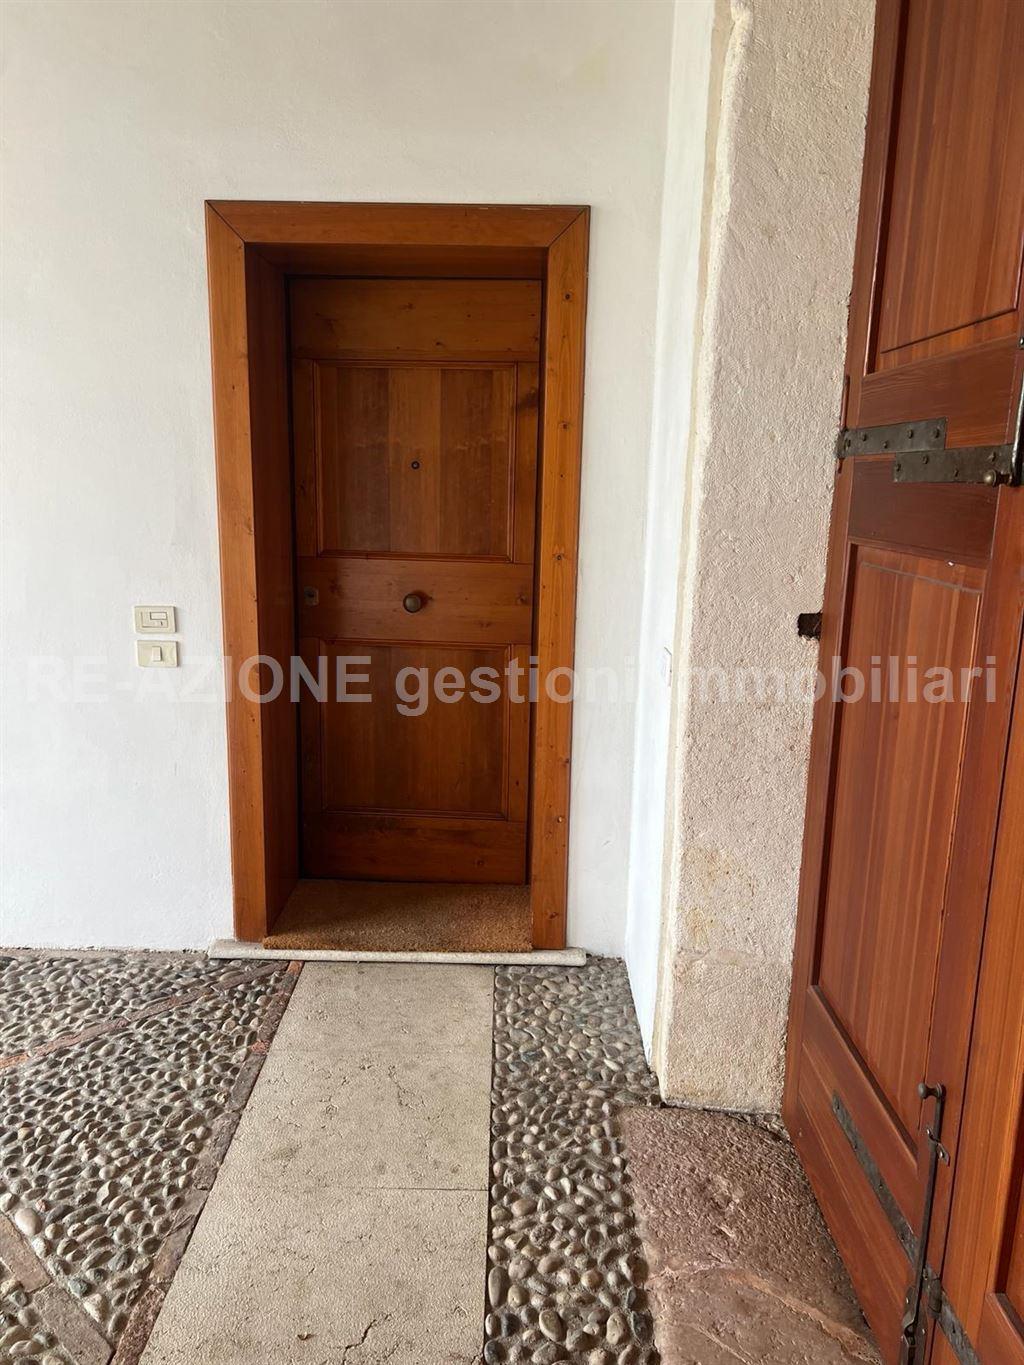 APARTMENT FOR RENT IN AN OLD VILLA